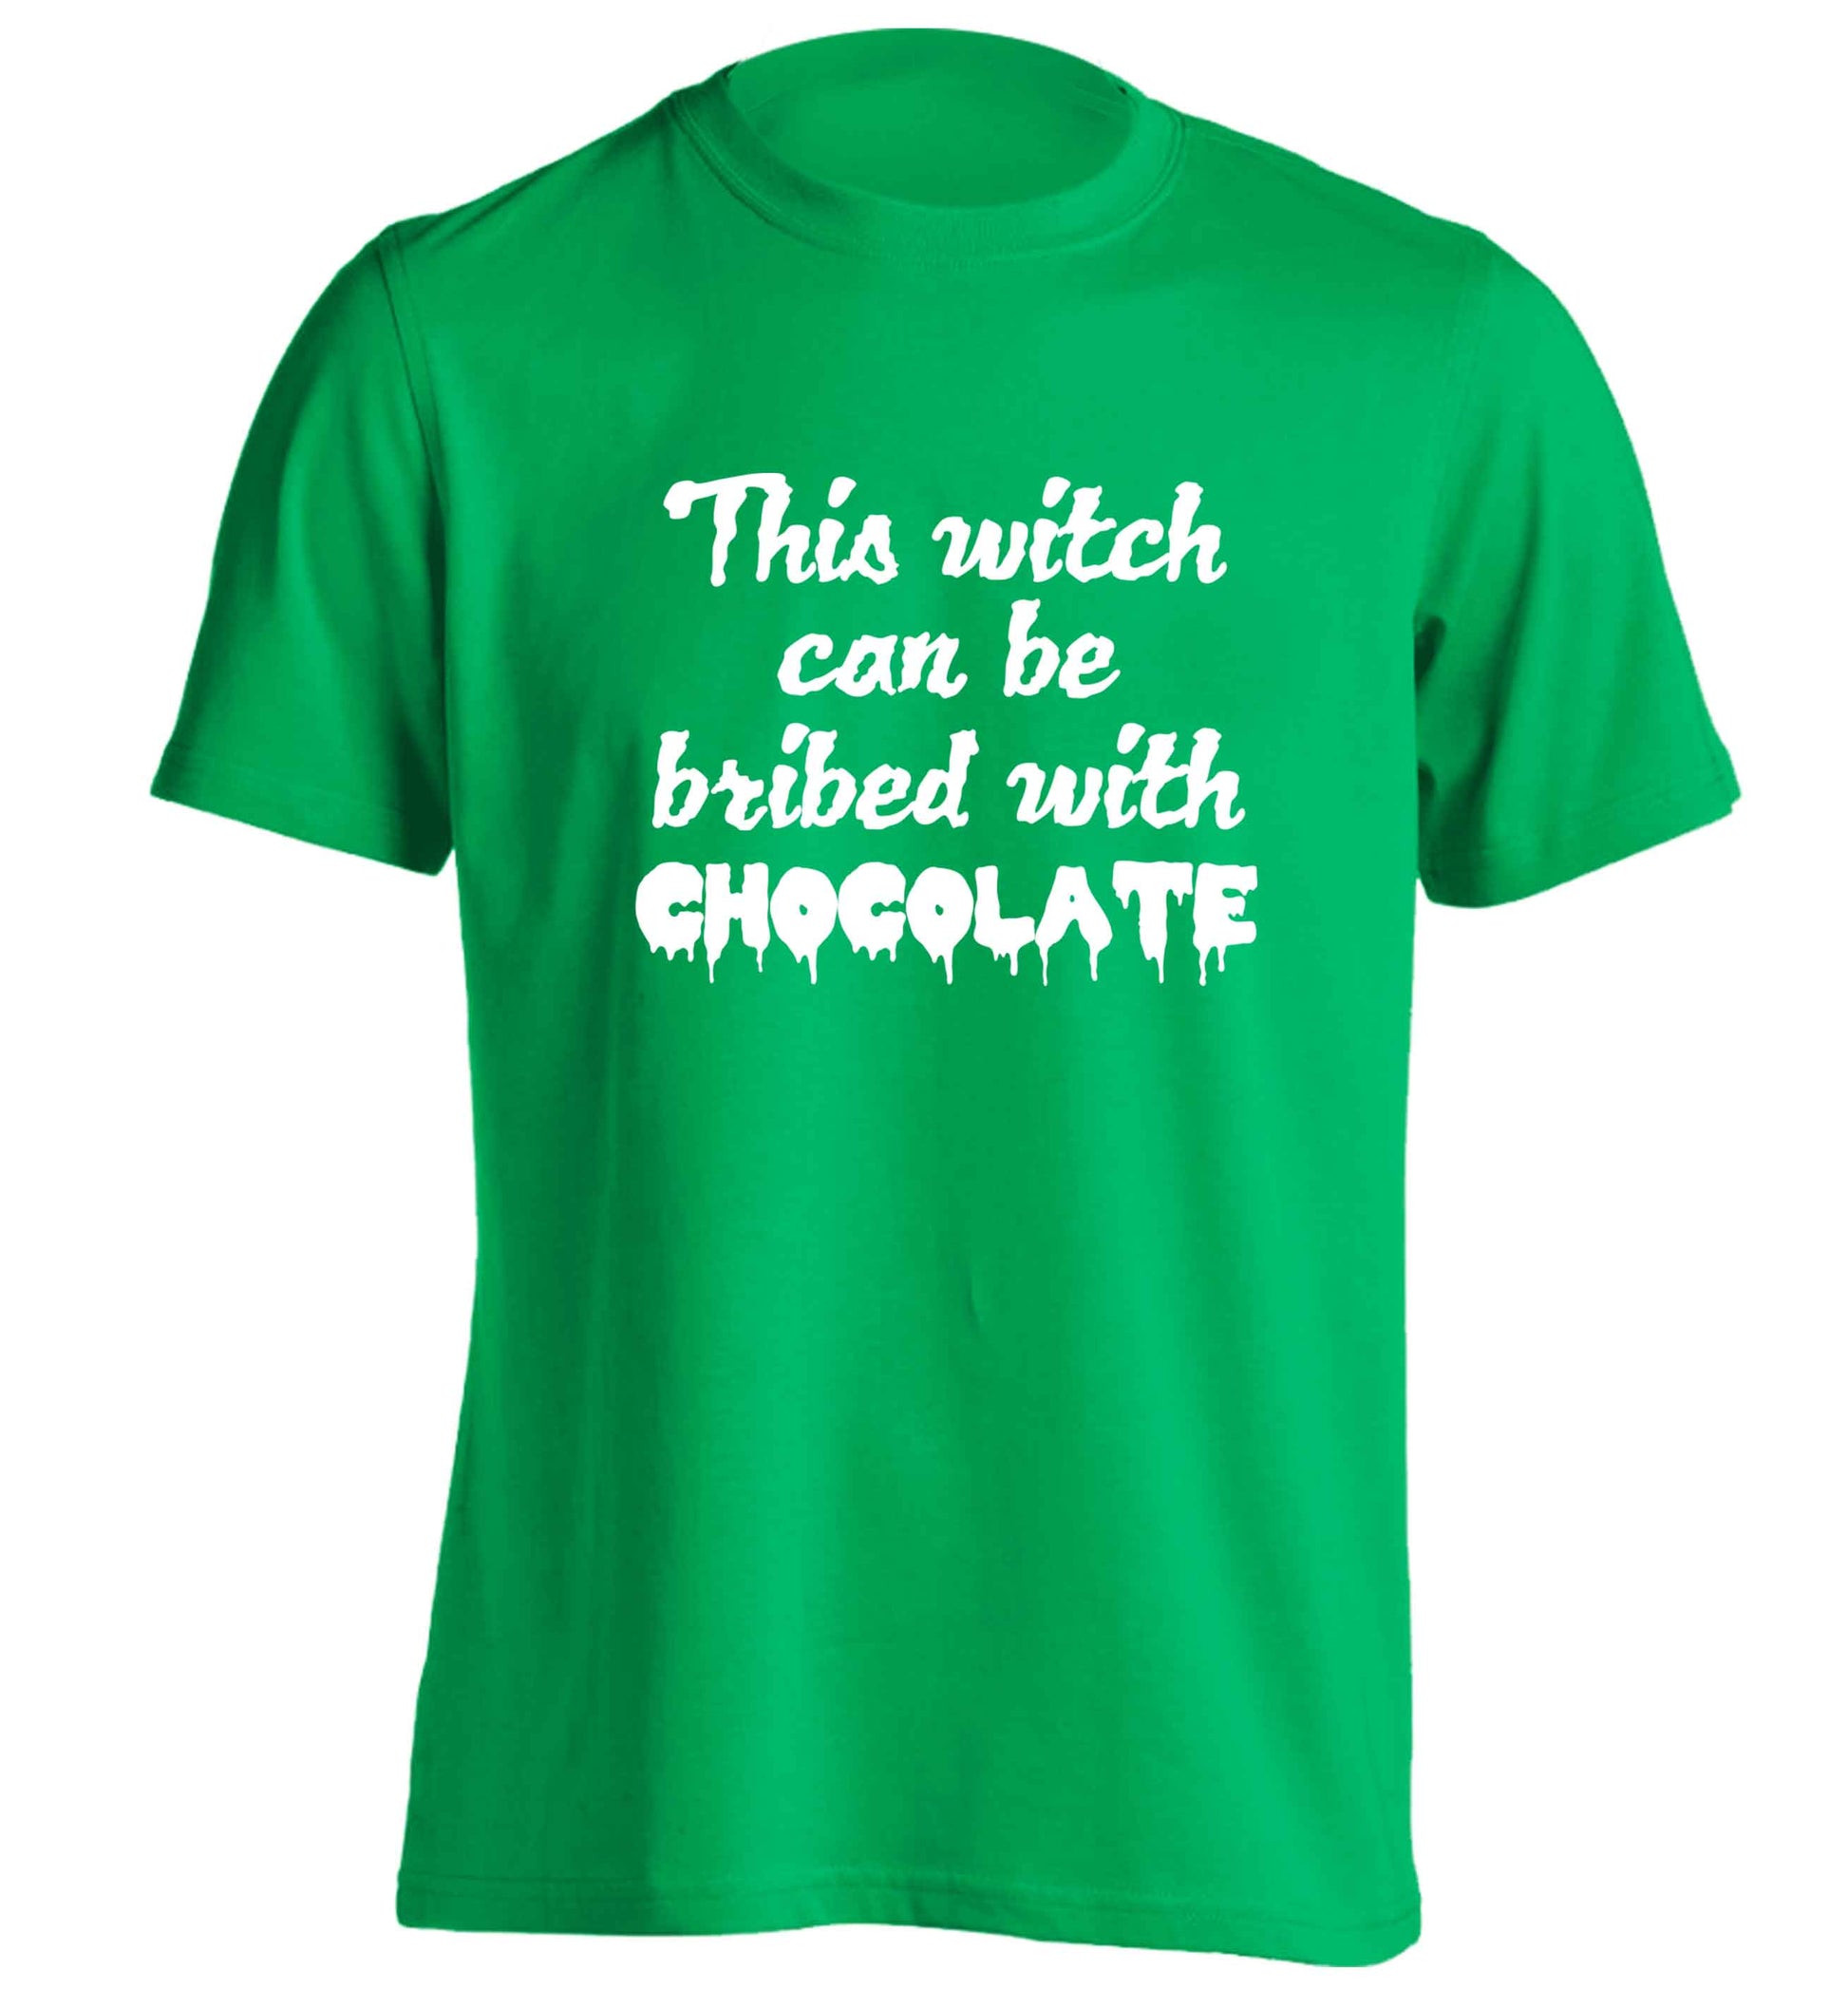 This witch can be bribed with chocolate adults unisex green Tshirt 2XL